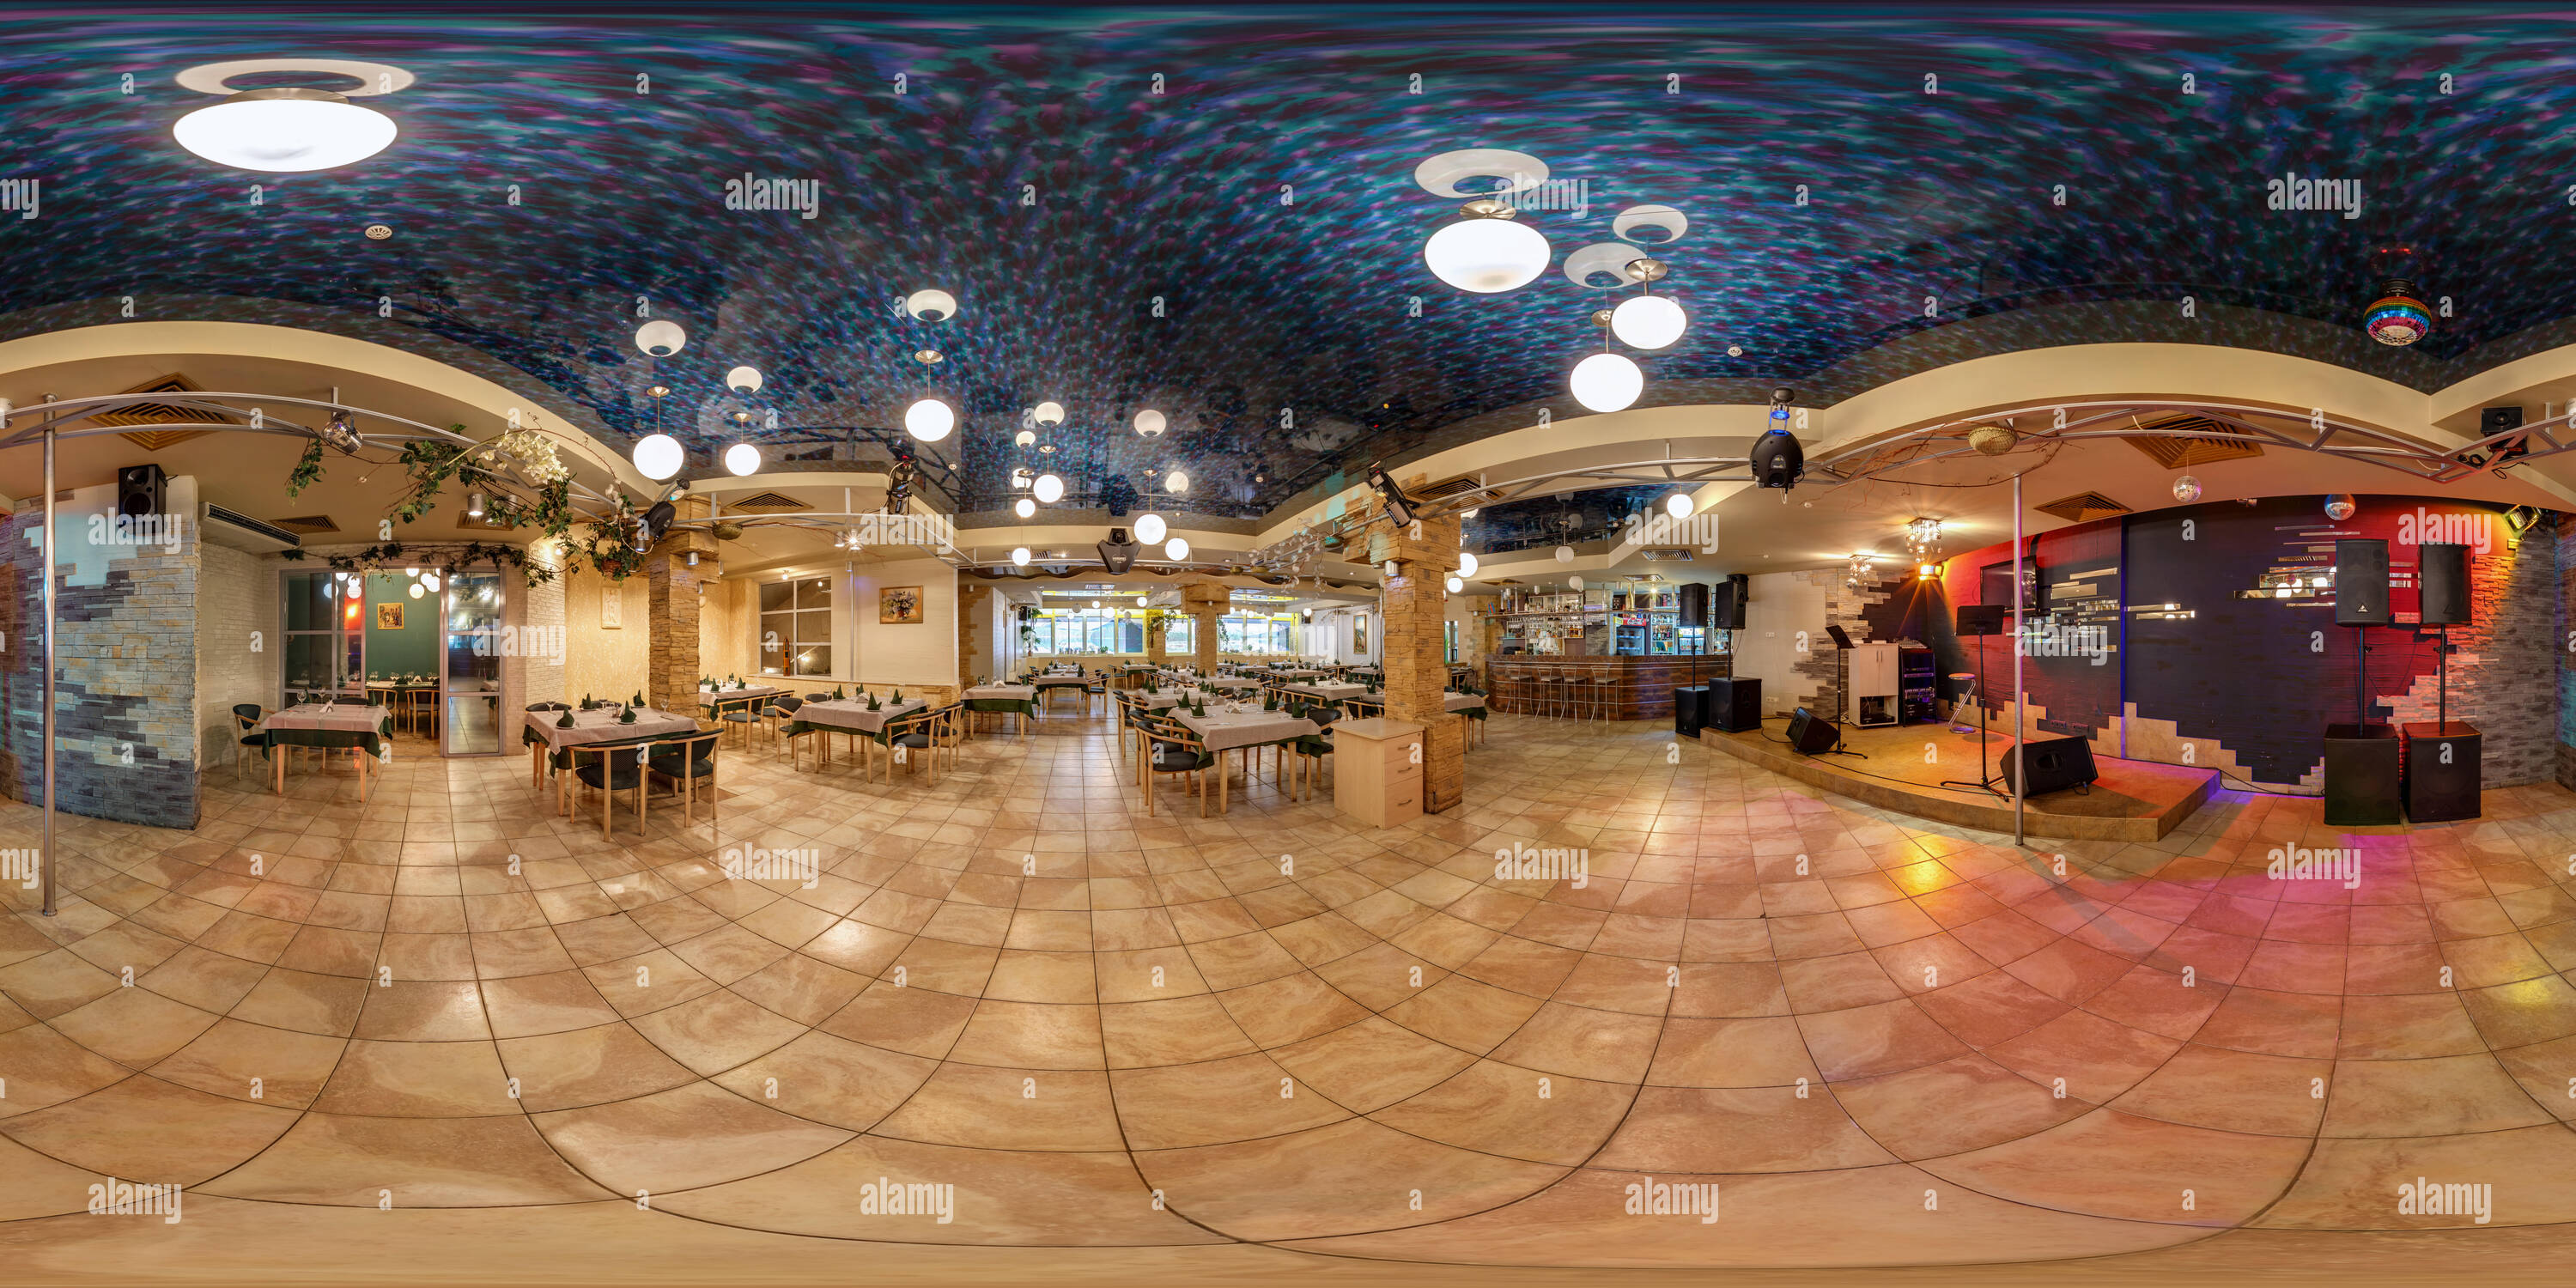 360 degree panoramic view of LIDA , BELARUS - MARCH 17, 2012: Inside of the interior of luxury Restaurant. Full 360 degree panorama in equirectangular spherical projection